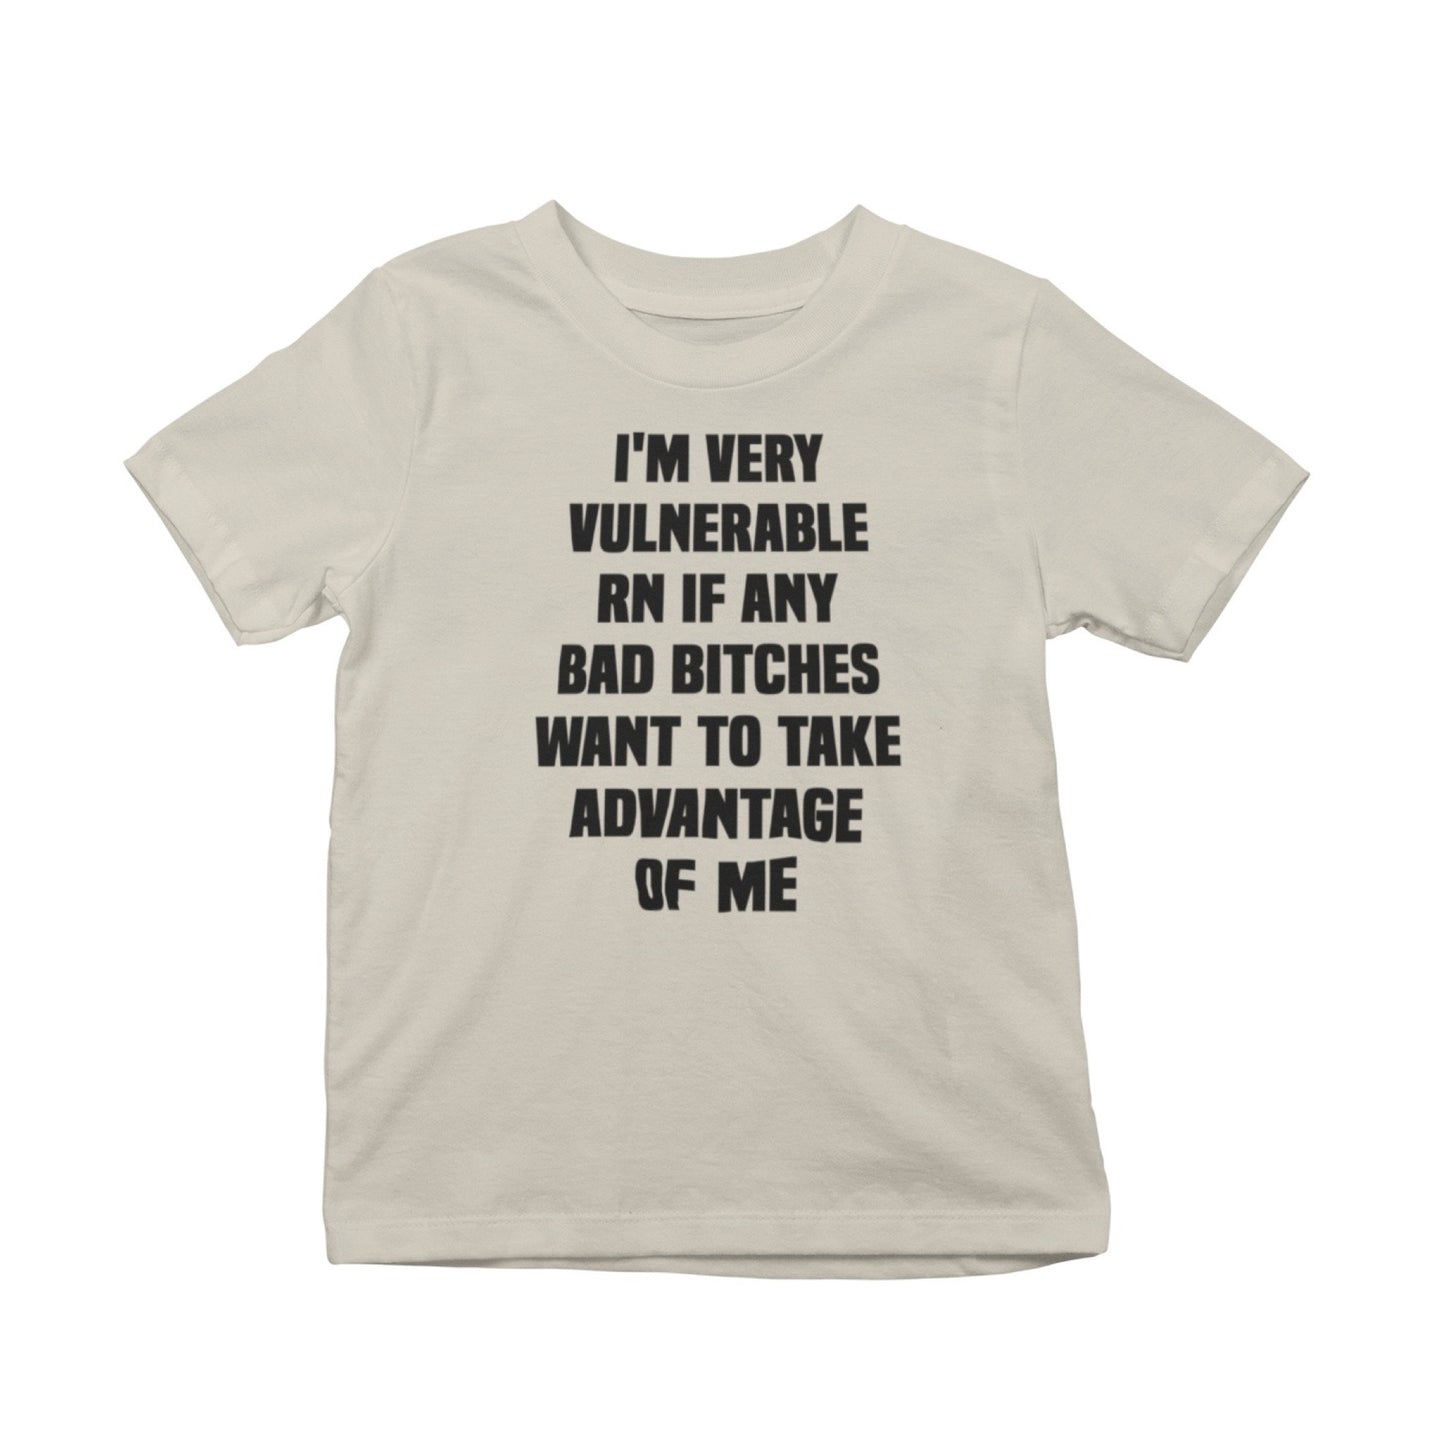 I'm Very Vulnerable Right Now If Any Bad Bitches Want to Take Advantage of Me T-Shirt